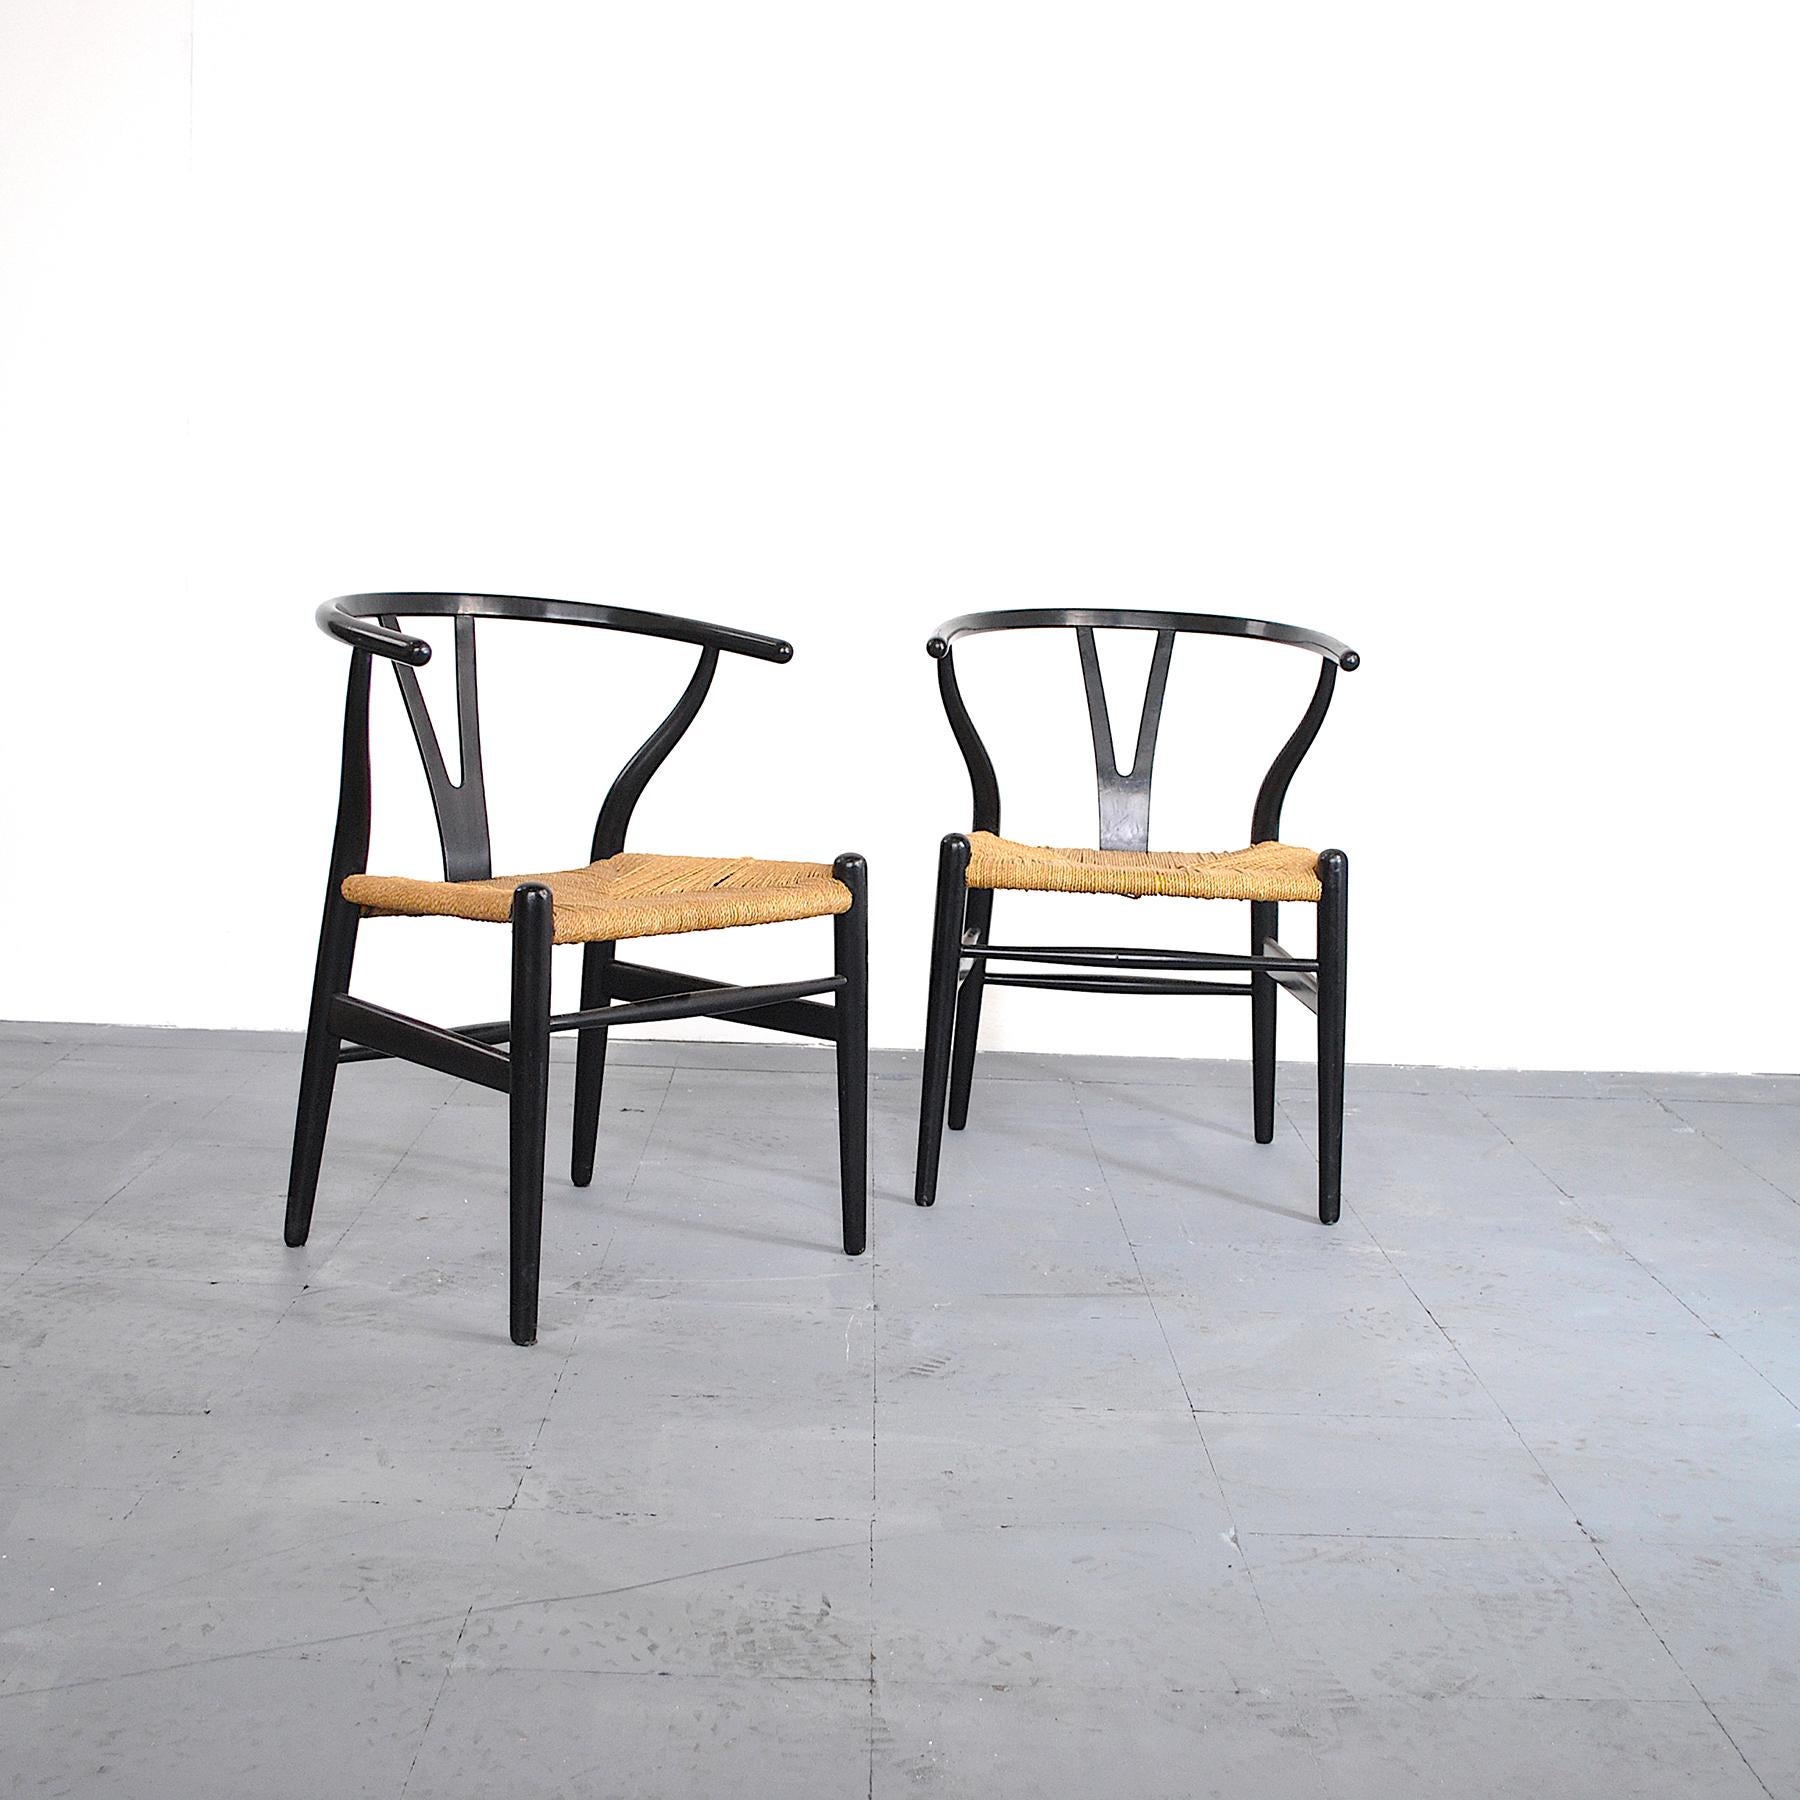 Nordic style chairs by Hans Wegner for Frans & Sons 